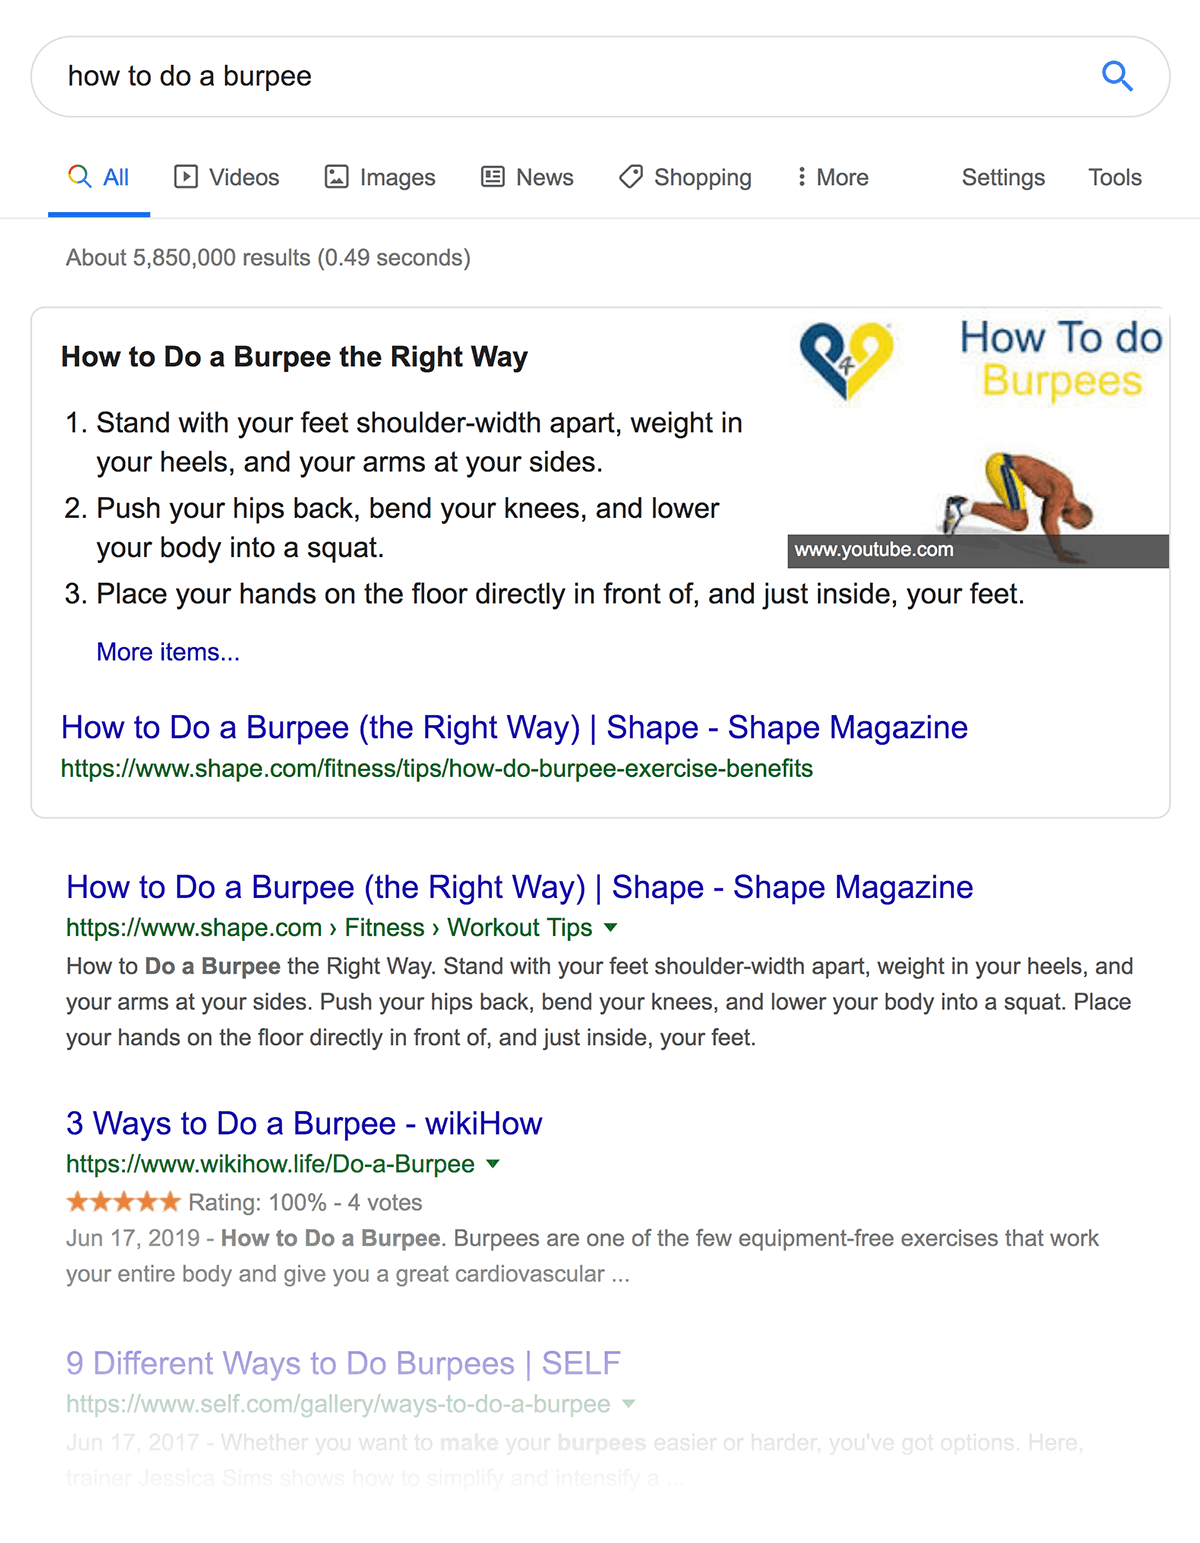 "how to do a burpee" search results